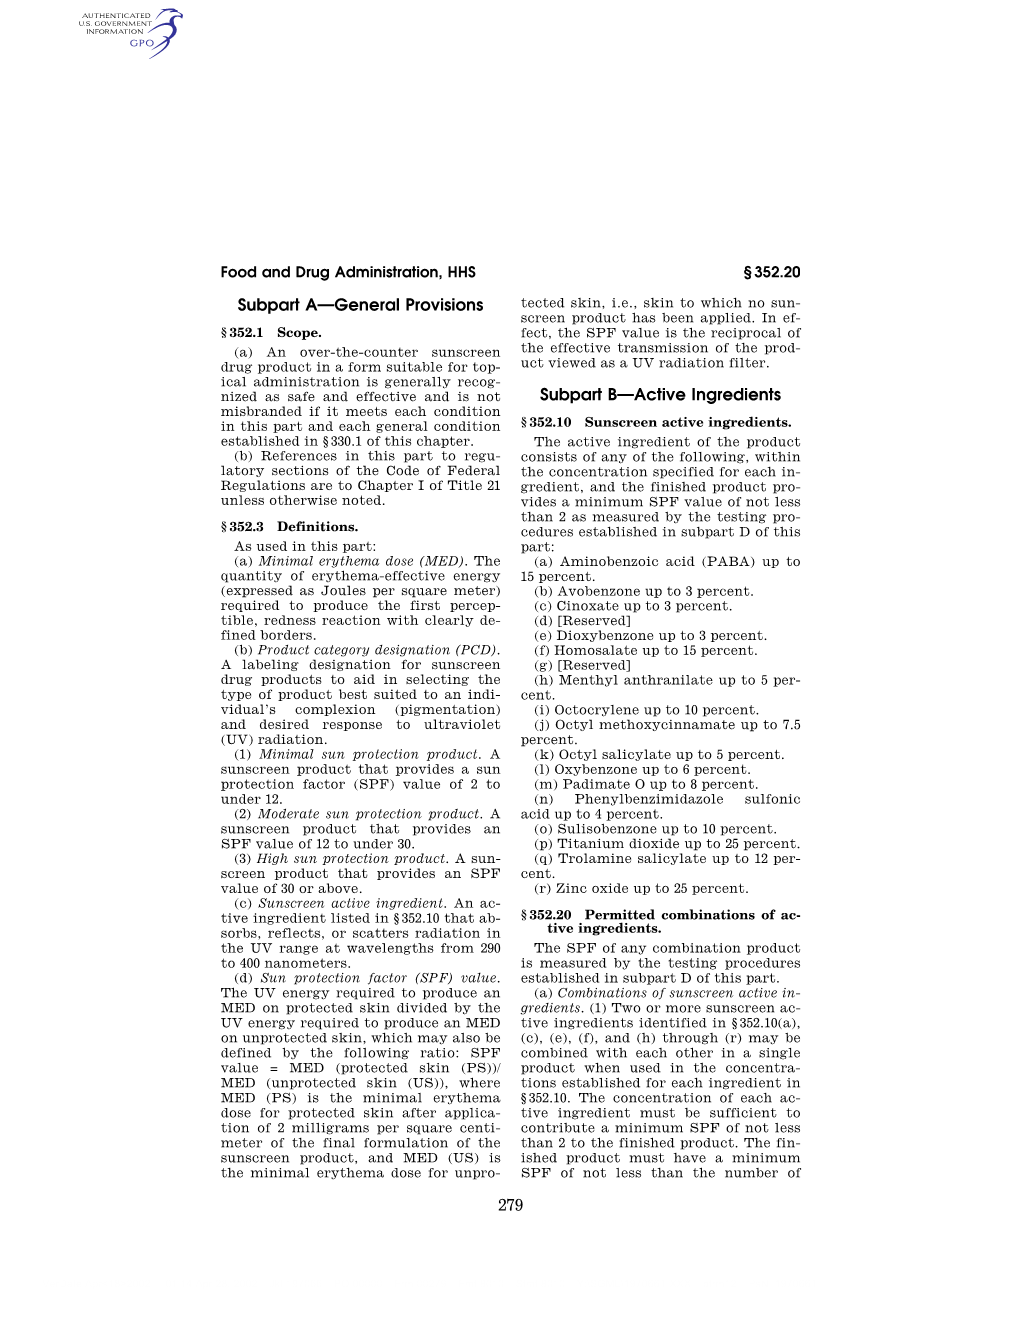 279 Subpart A—General Provisions Subpart B—Active Ingredients